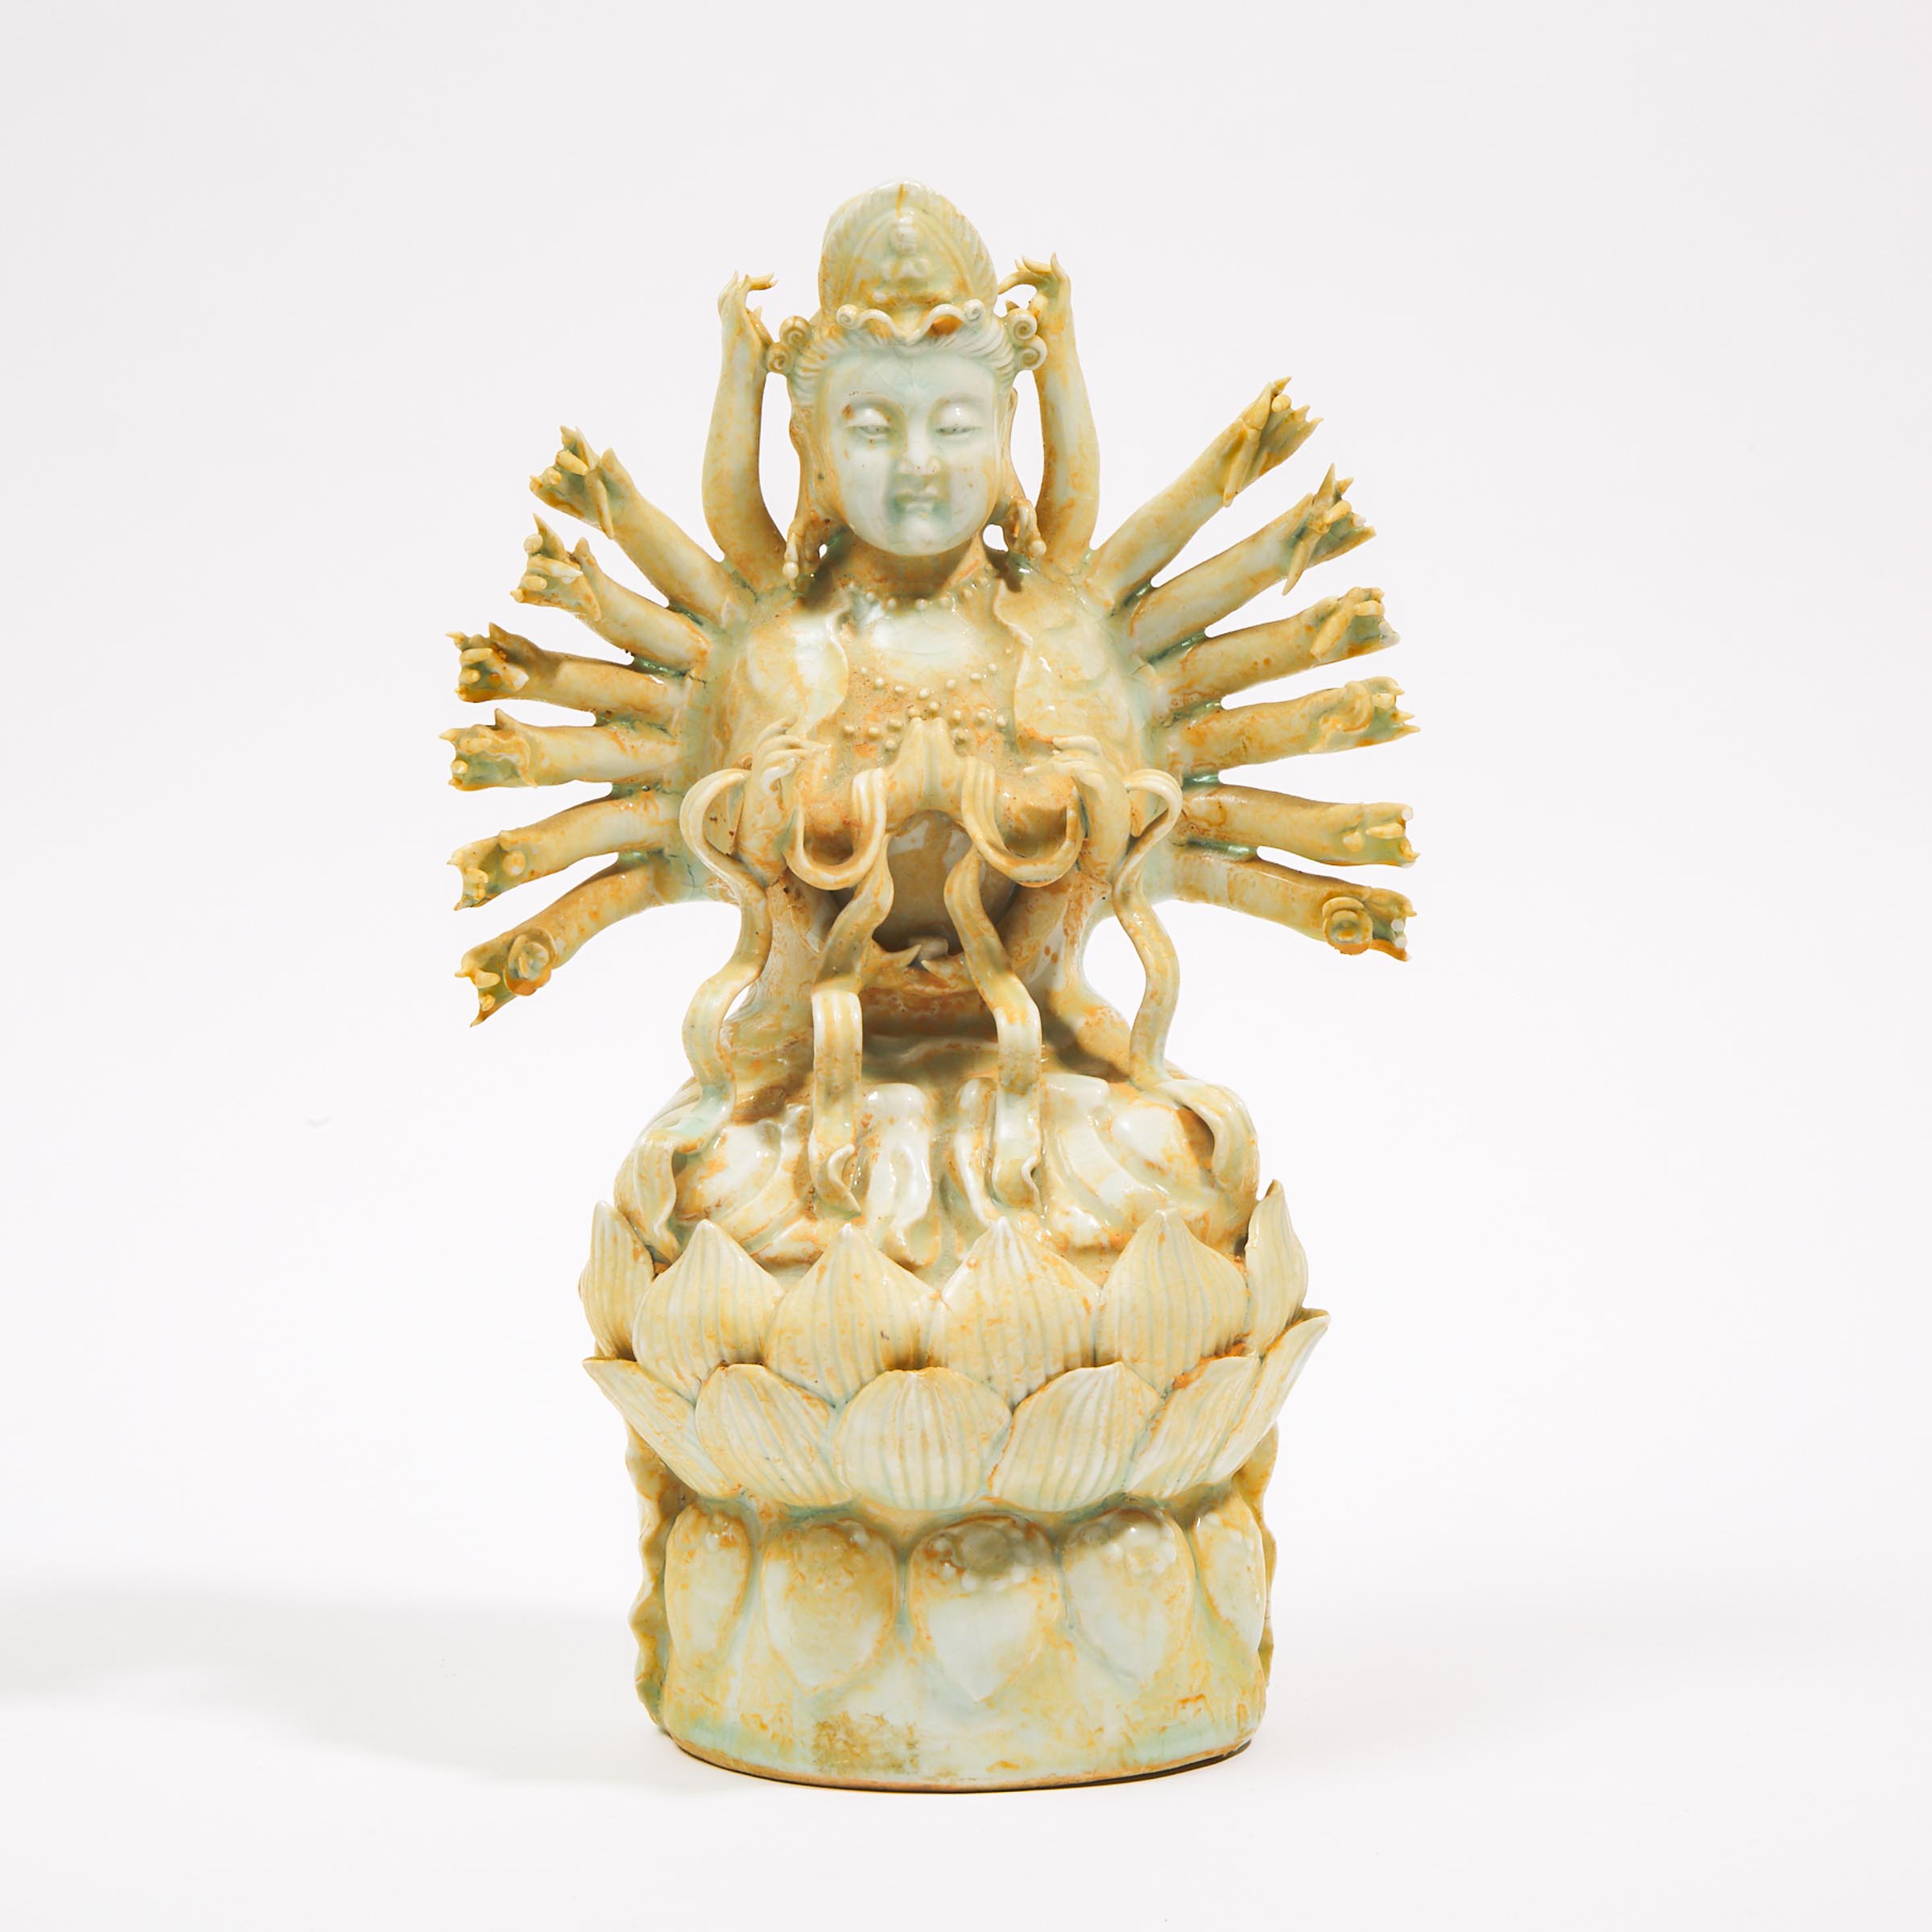 A Yingqing Seated Figure of Thousand-Armed Guanyin